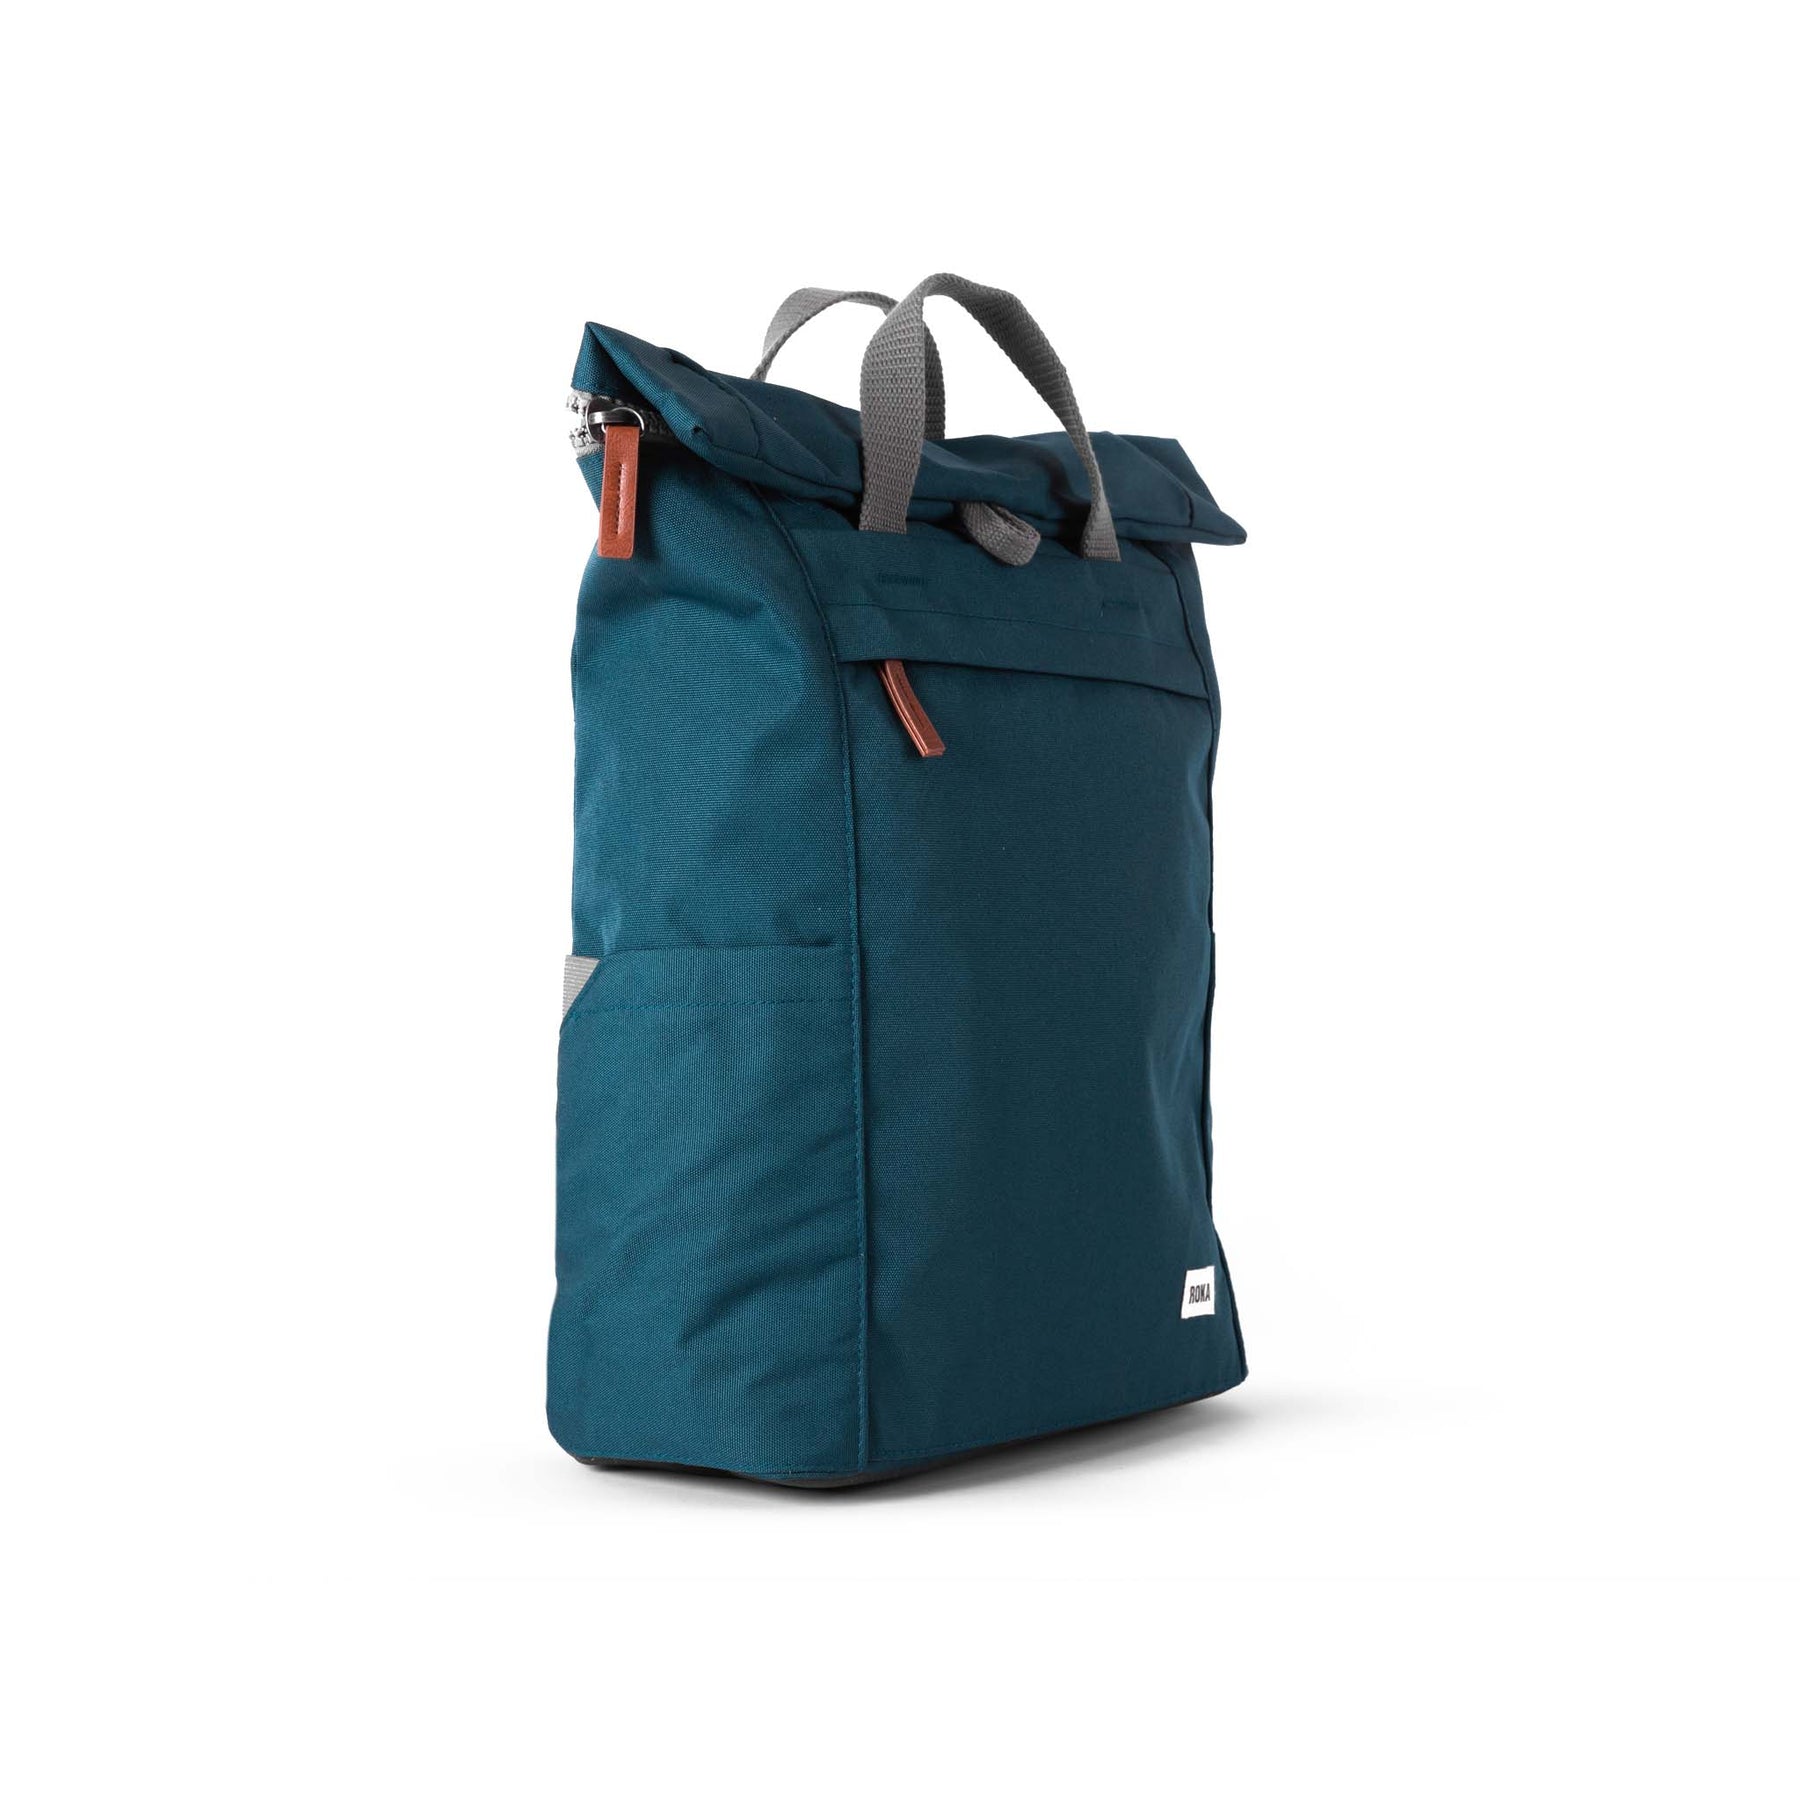 ROKA Finchley A Teal Large Recycled Canvas Bag - OS